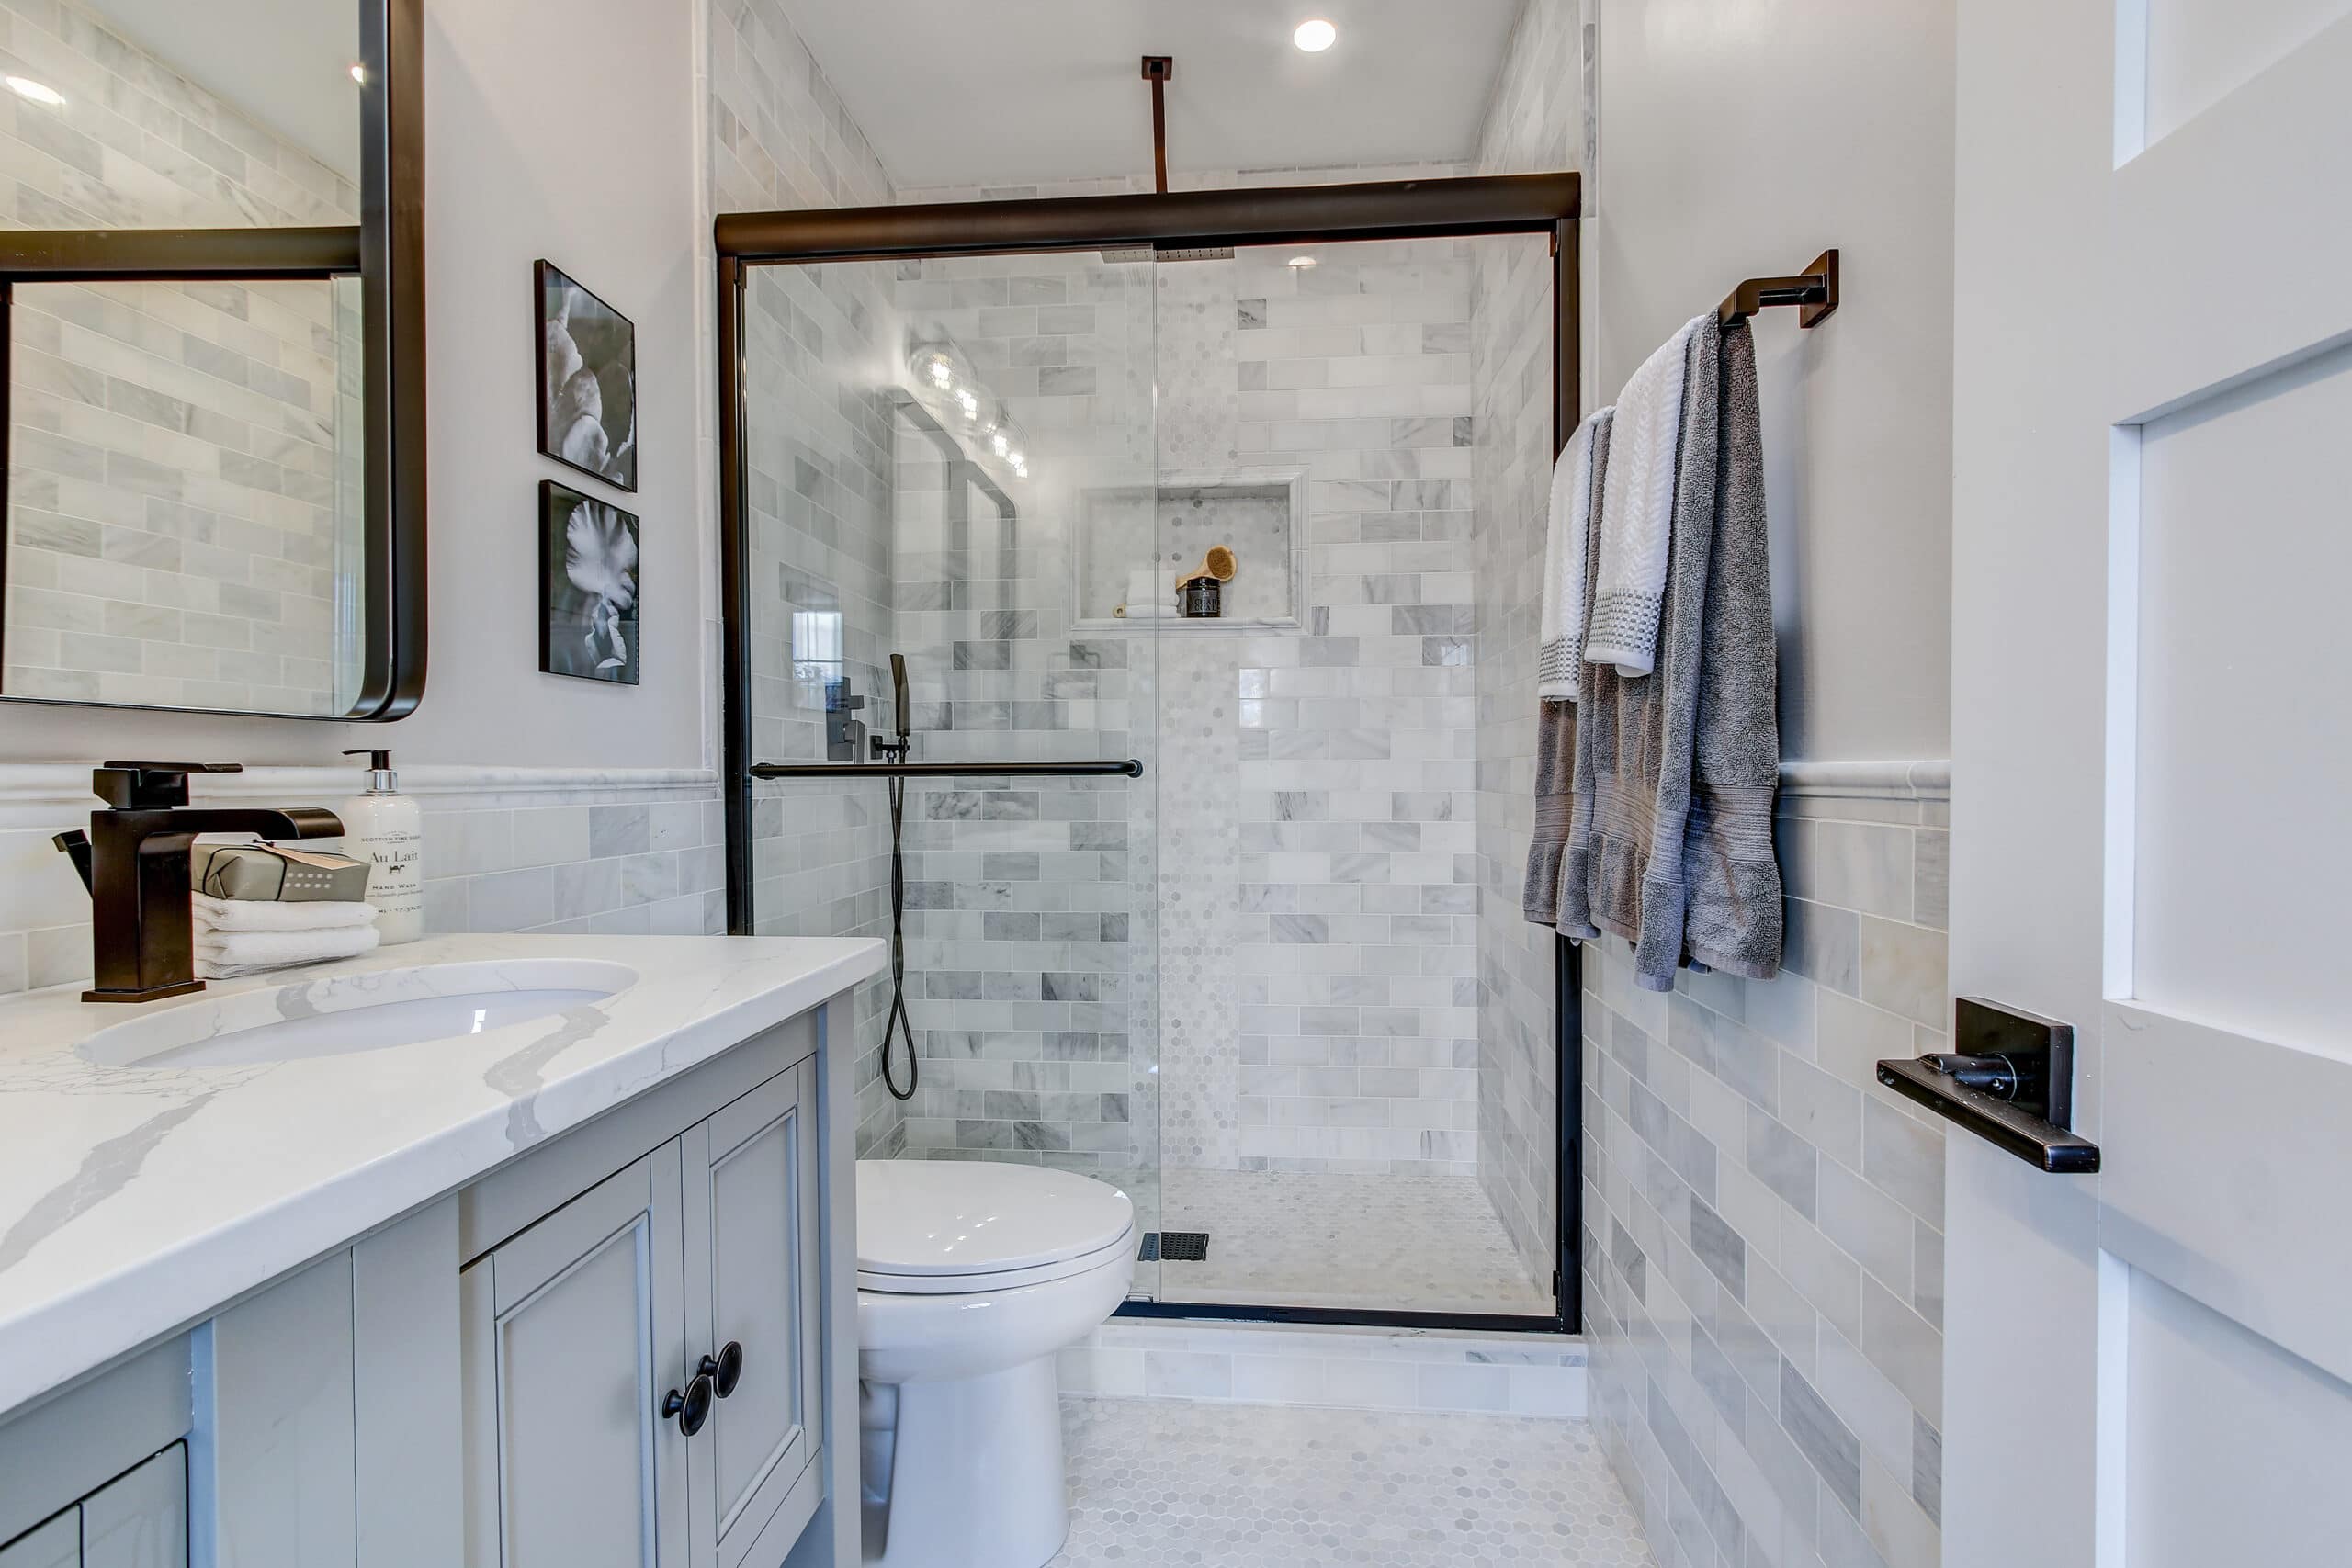 Bathroom Remodeling Length How Long Does a Remodel Take?